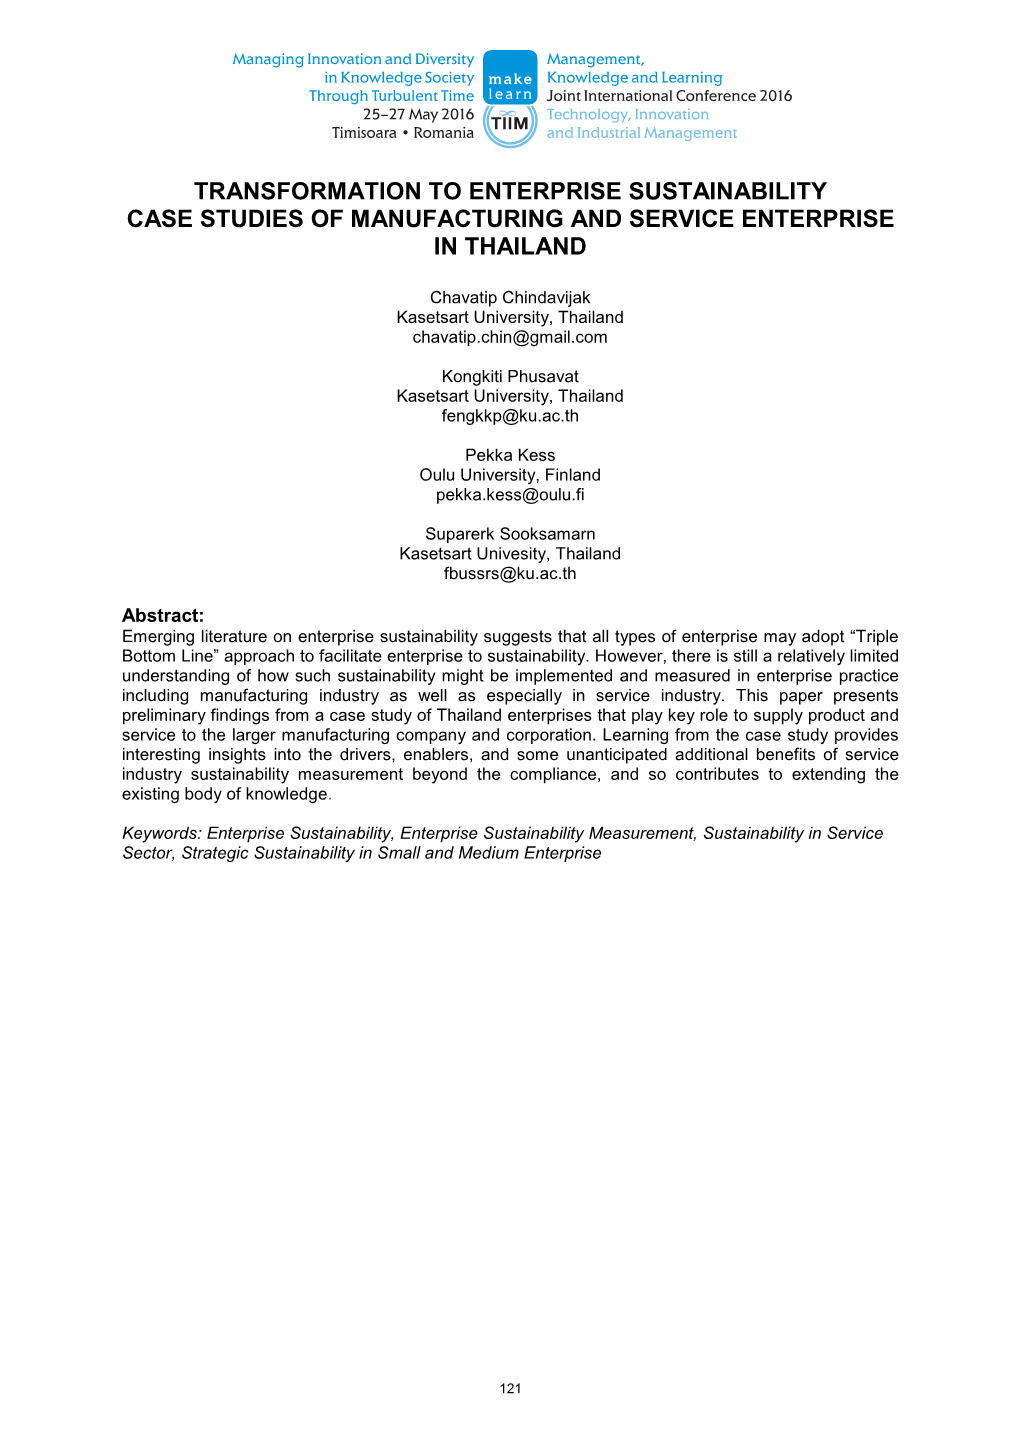 Transformation to Enterprise Sustainability Case Studies of Manufacturing and Service Enterprise in Thailand